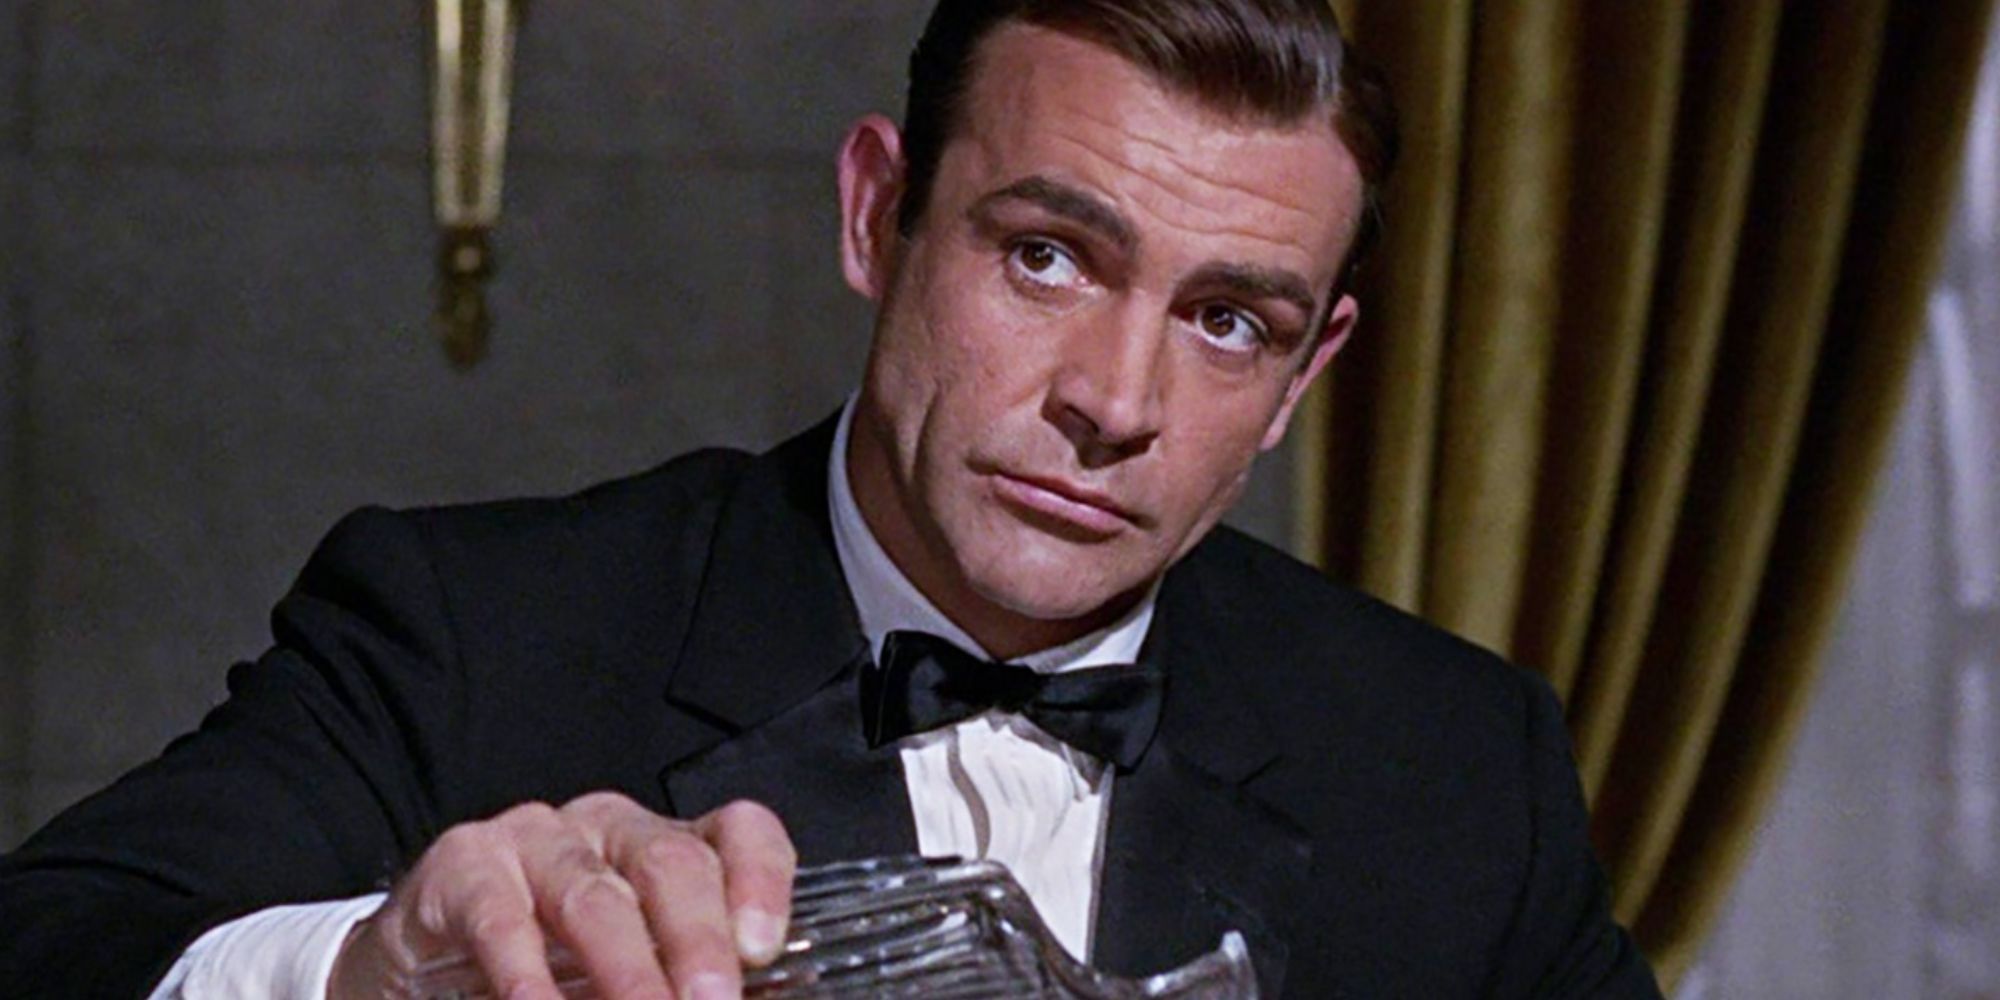 Sean Connery as James Bond pouring himself a drink